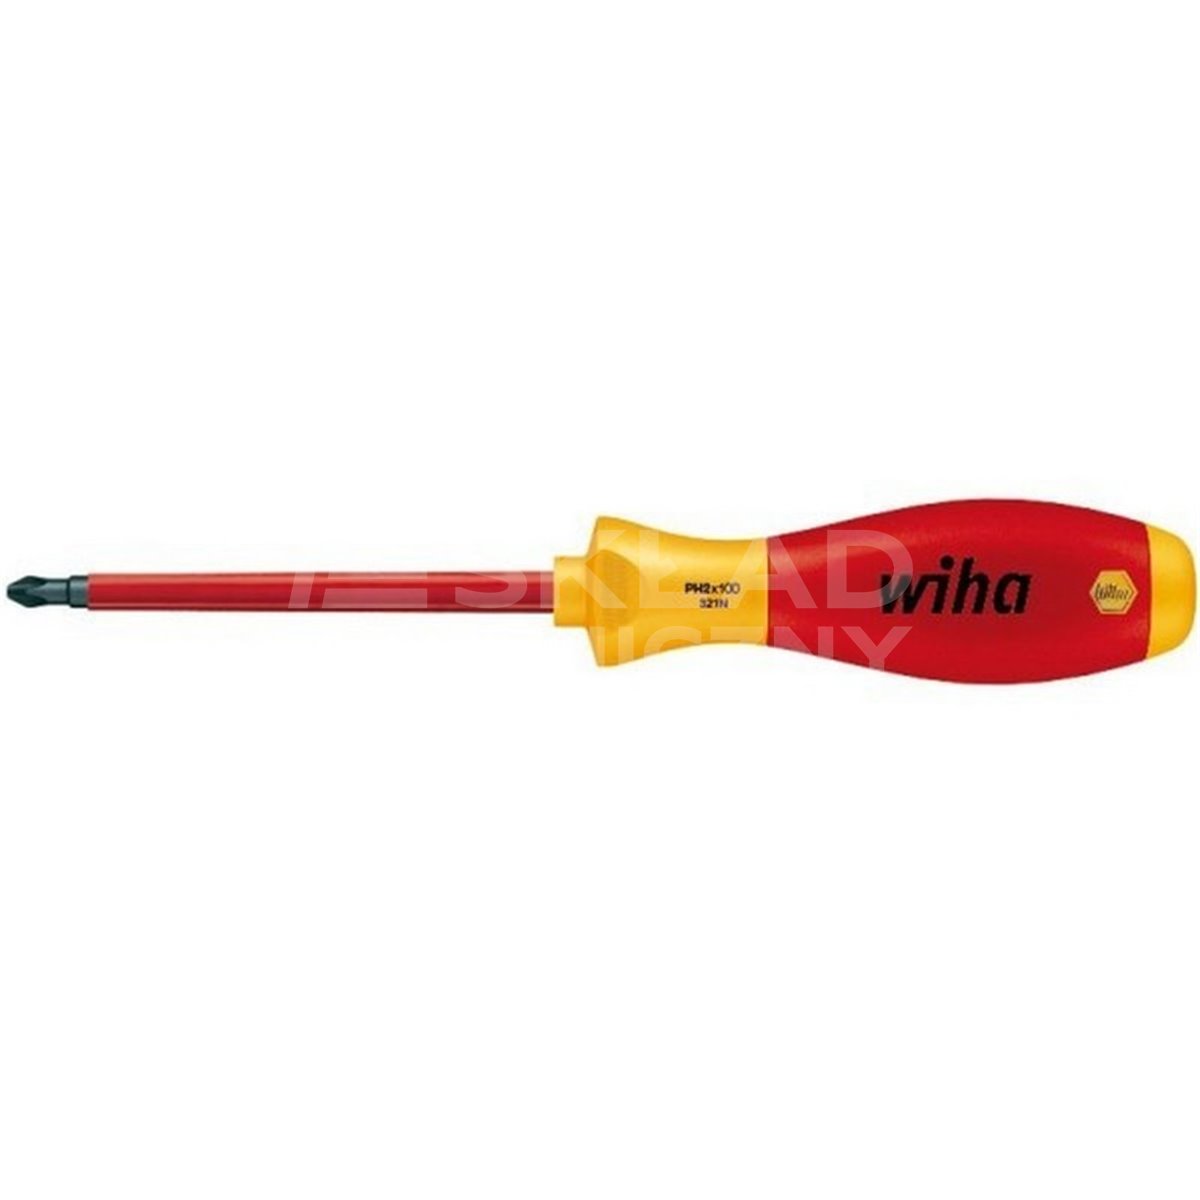 Phillips SoftFinish Electric VDE 321N PH1 80mm screwdriver by Wiha 00847.